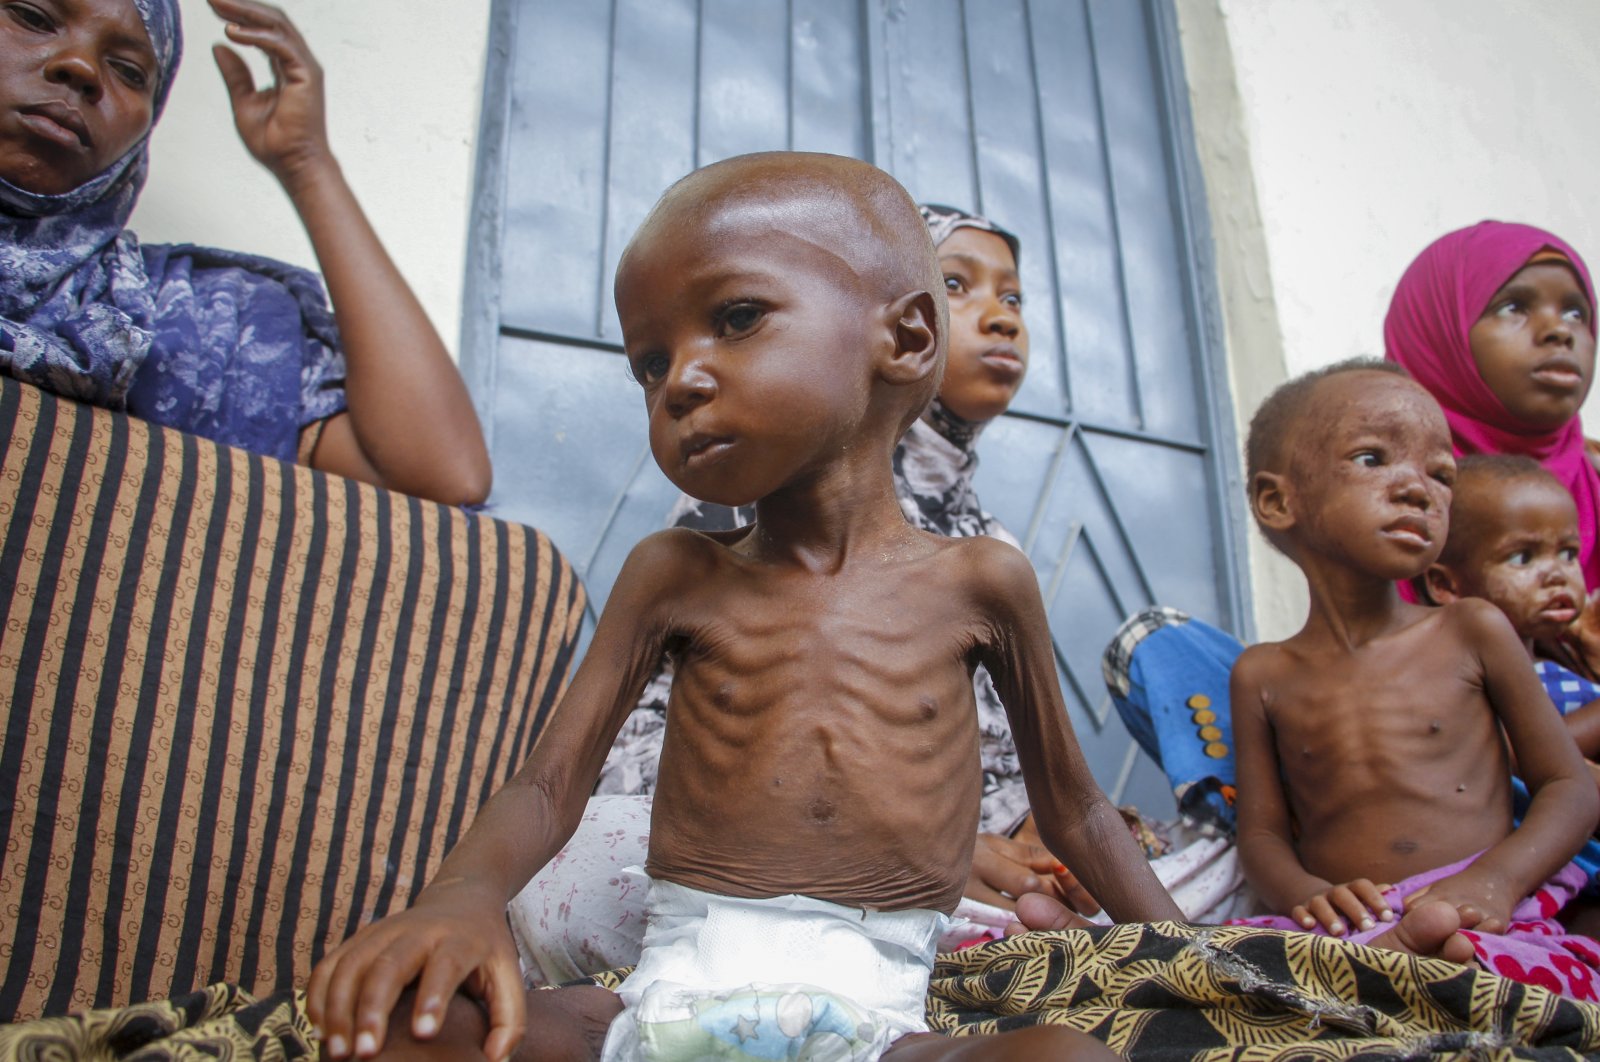 A malnourished 2-year-old sits by his mother (L), who was recently displaced by drought, at a malnutrition stabilization center run by Action Against Hunger, Mogadishu, Somalia, June 5, 2022. (AP Photo)